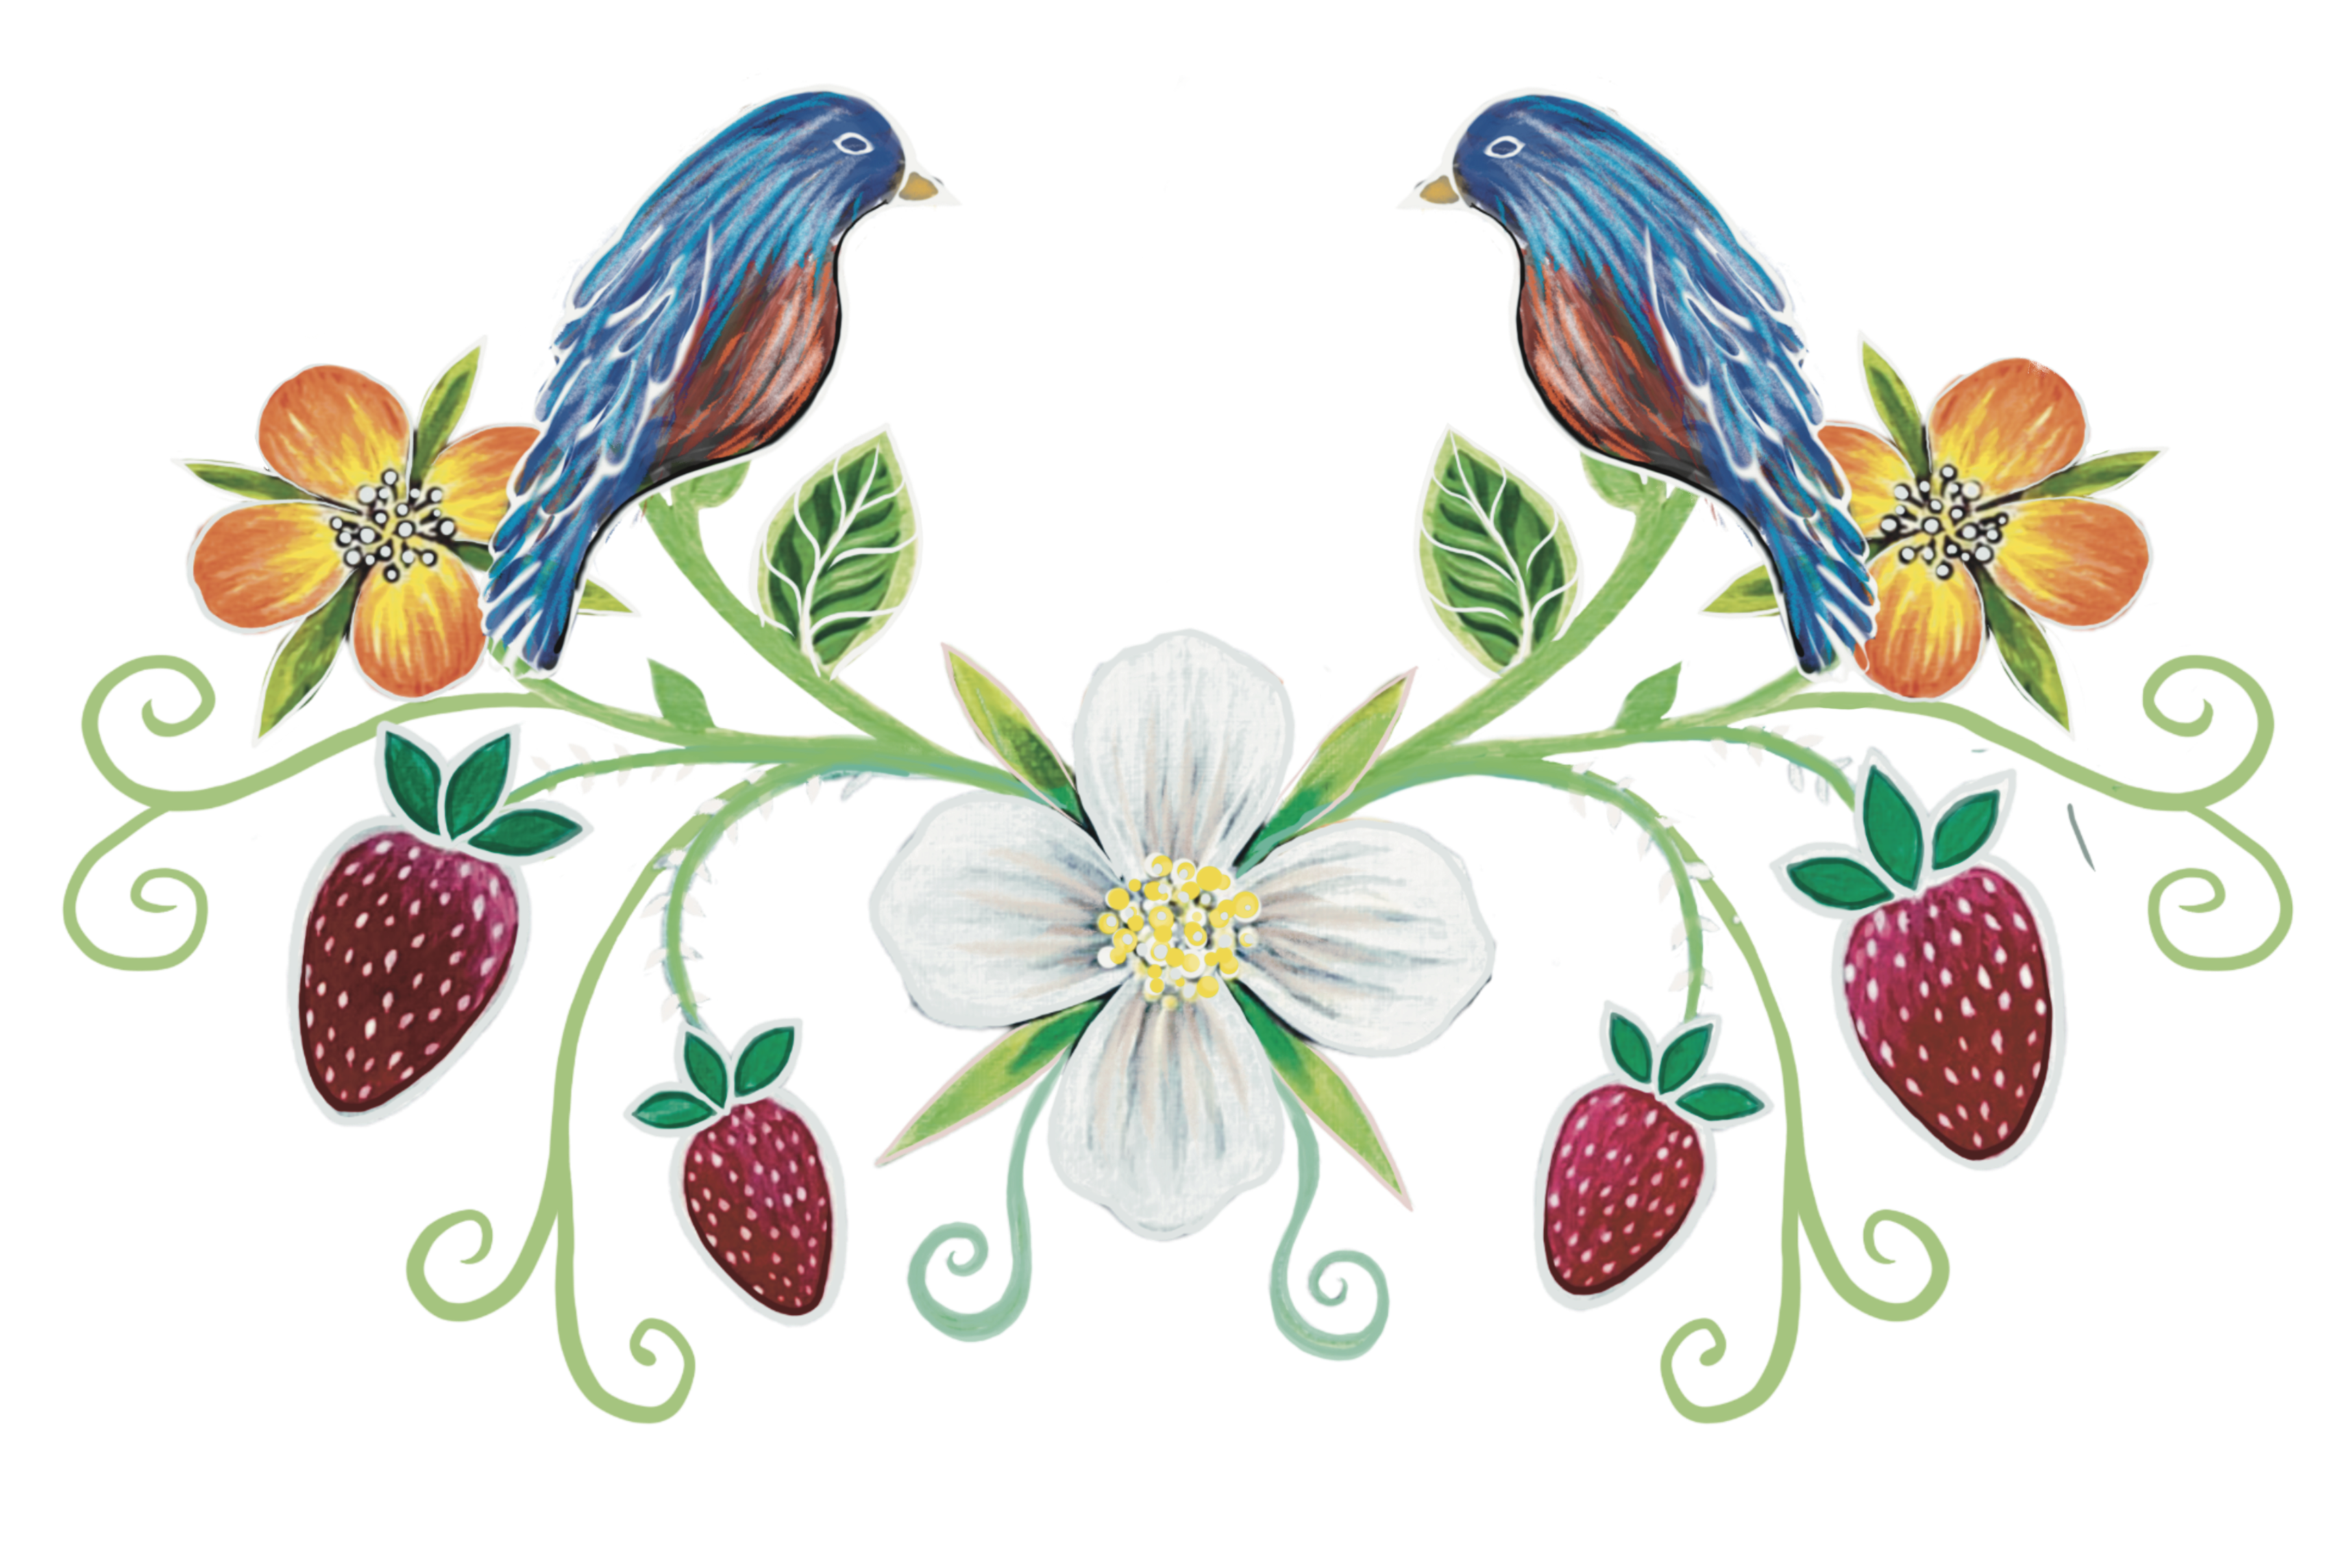 An illustration of two blue birds facing each other, resting on the vines of a strawberry plant.